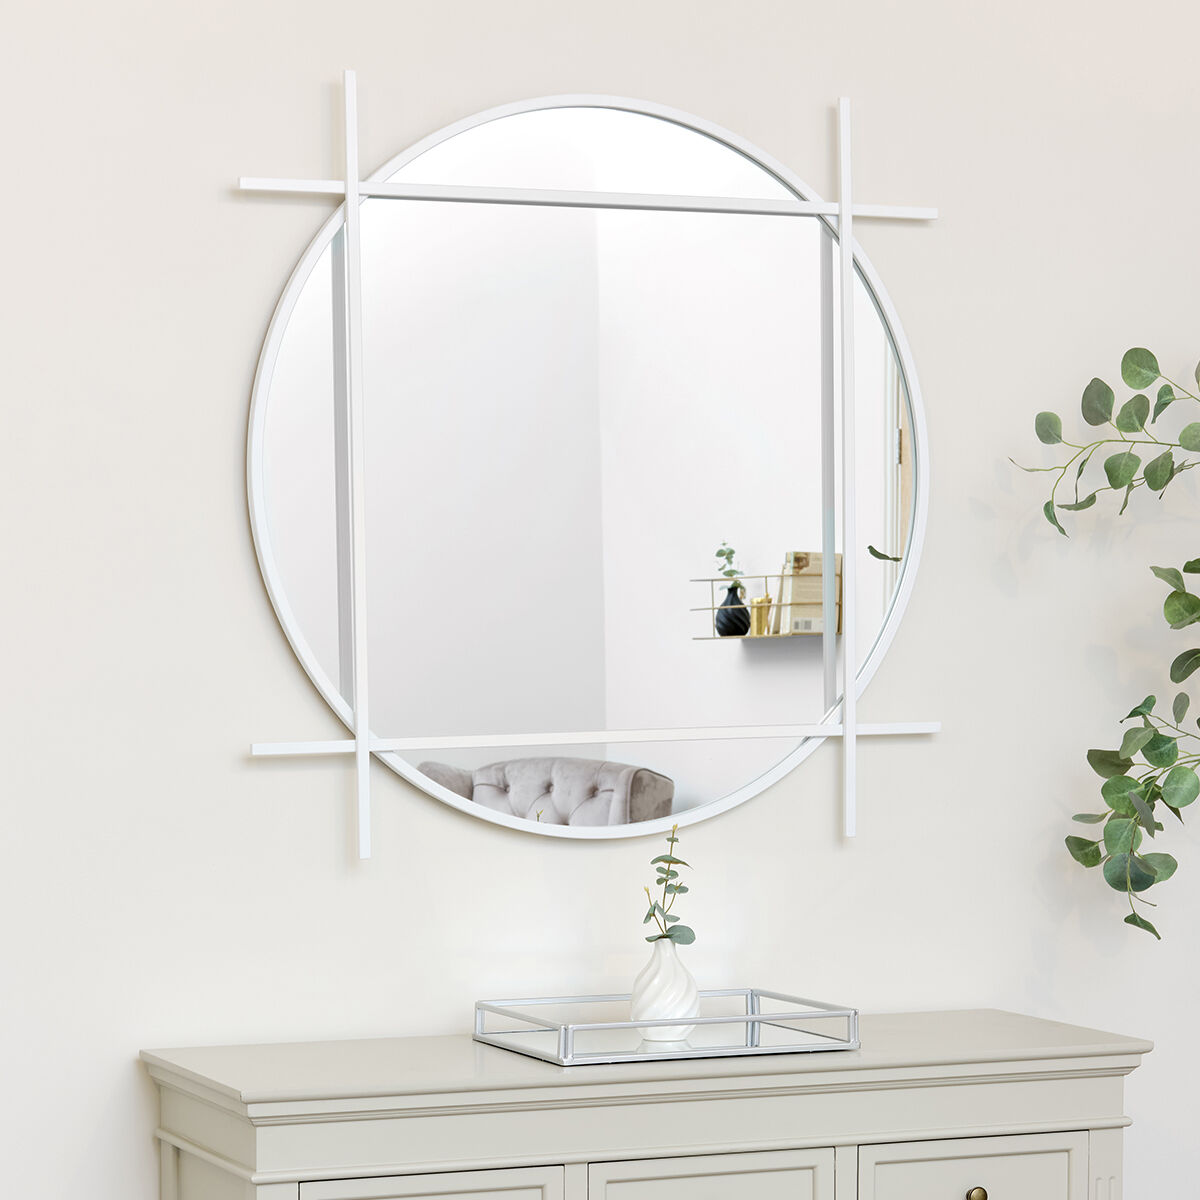 Large Round White Wall Mirror 97cm x 97cm Material: Metal, wood, glass